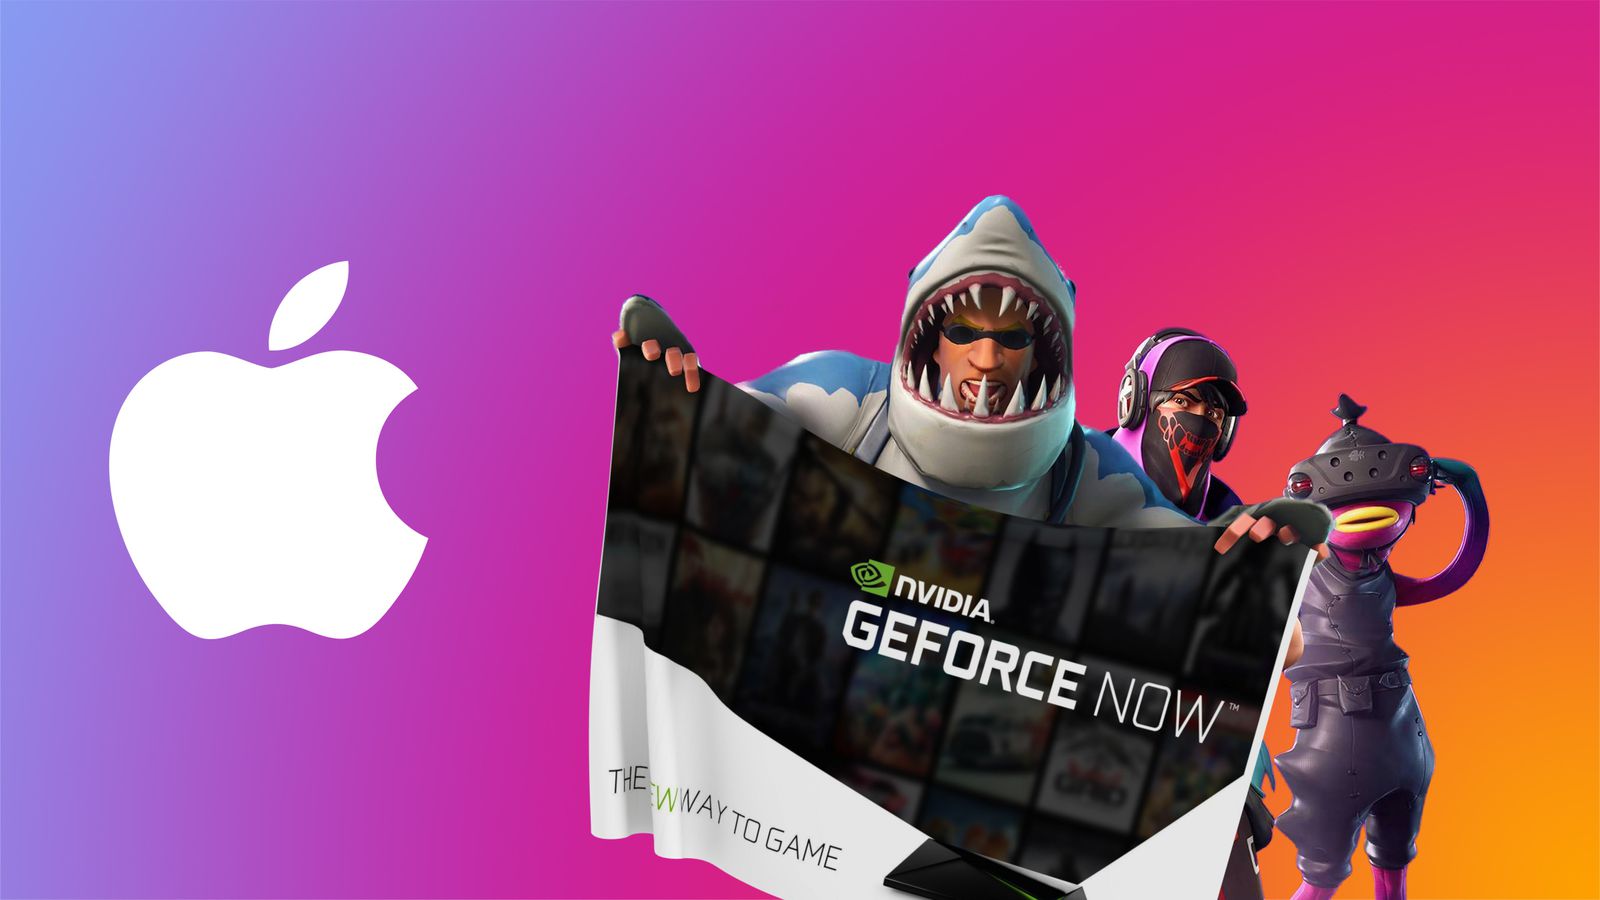 Fortnite will come back to iOS via Nvidia's new GeForce Now cloud gaming  service-Tech News , Firstpost